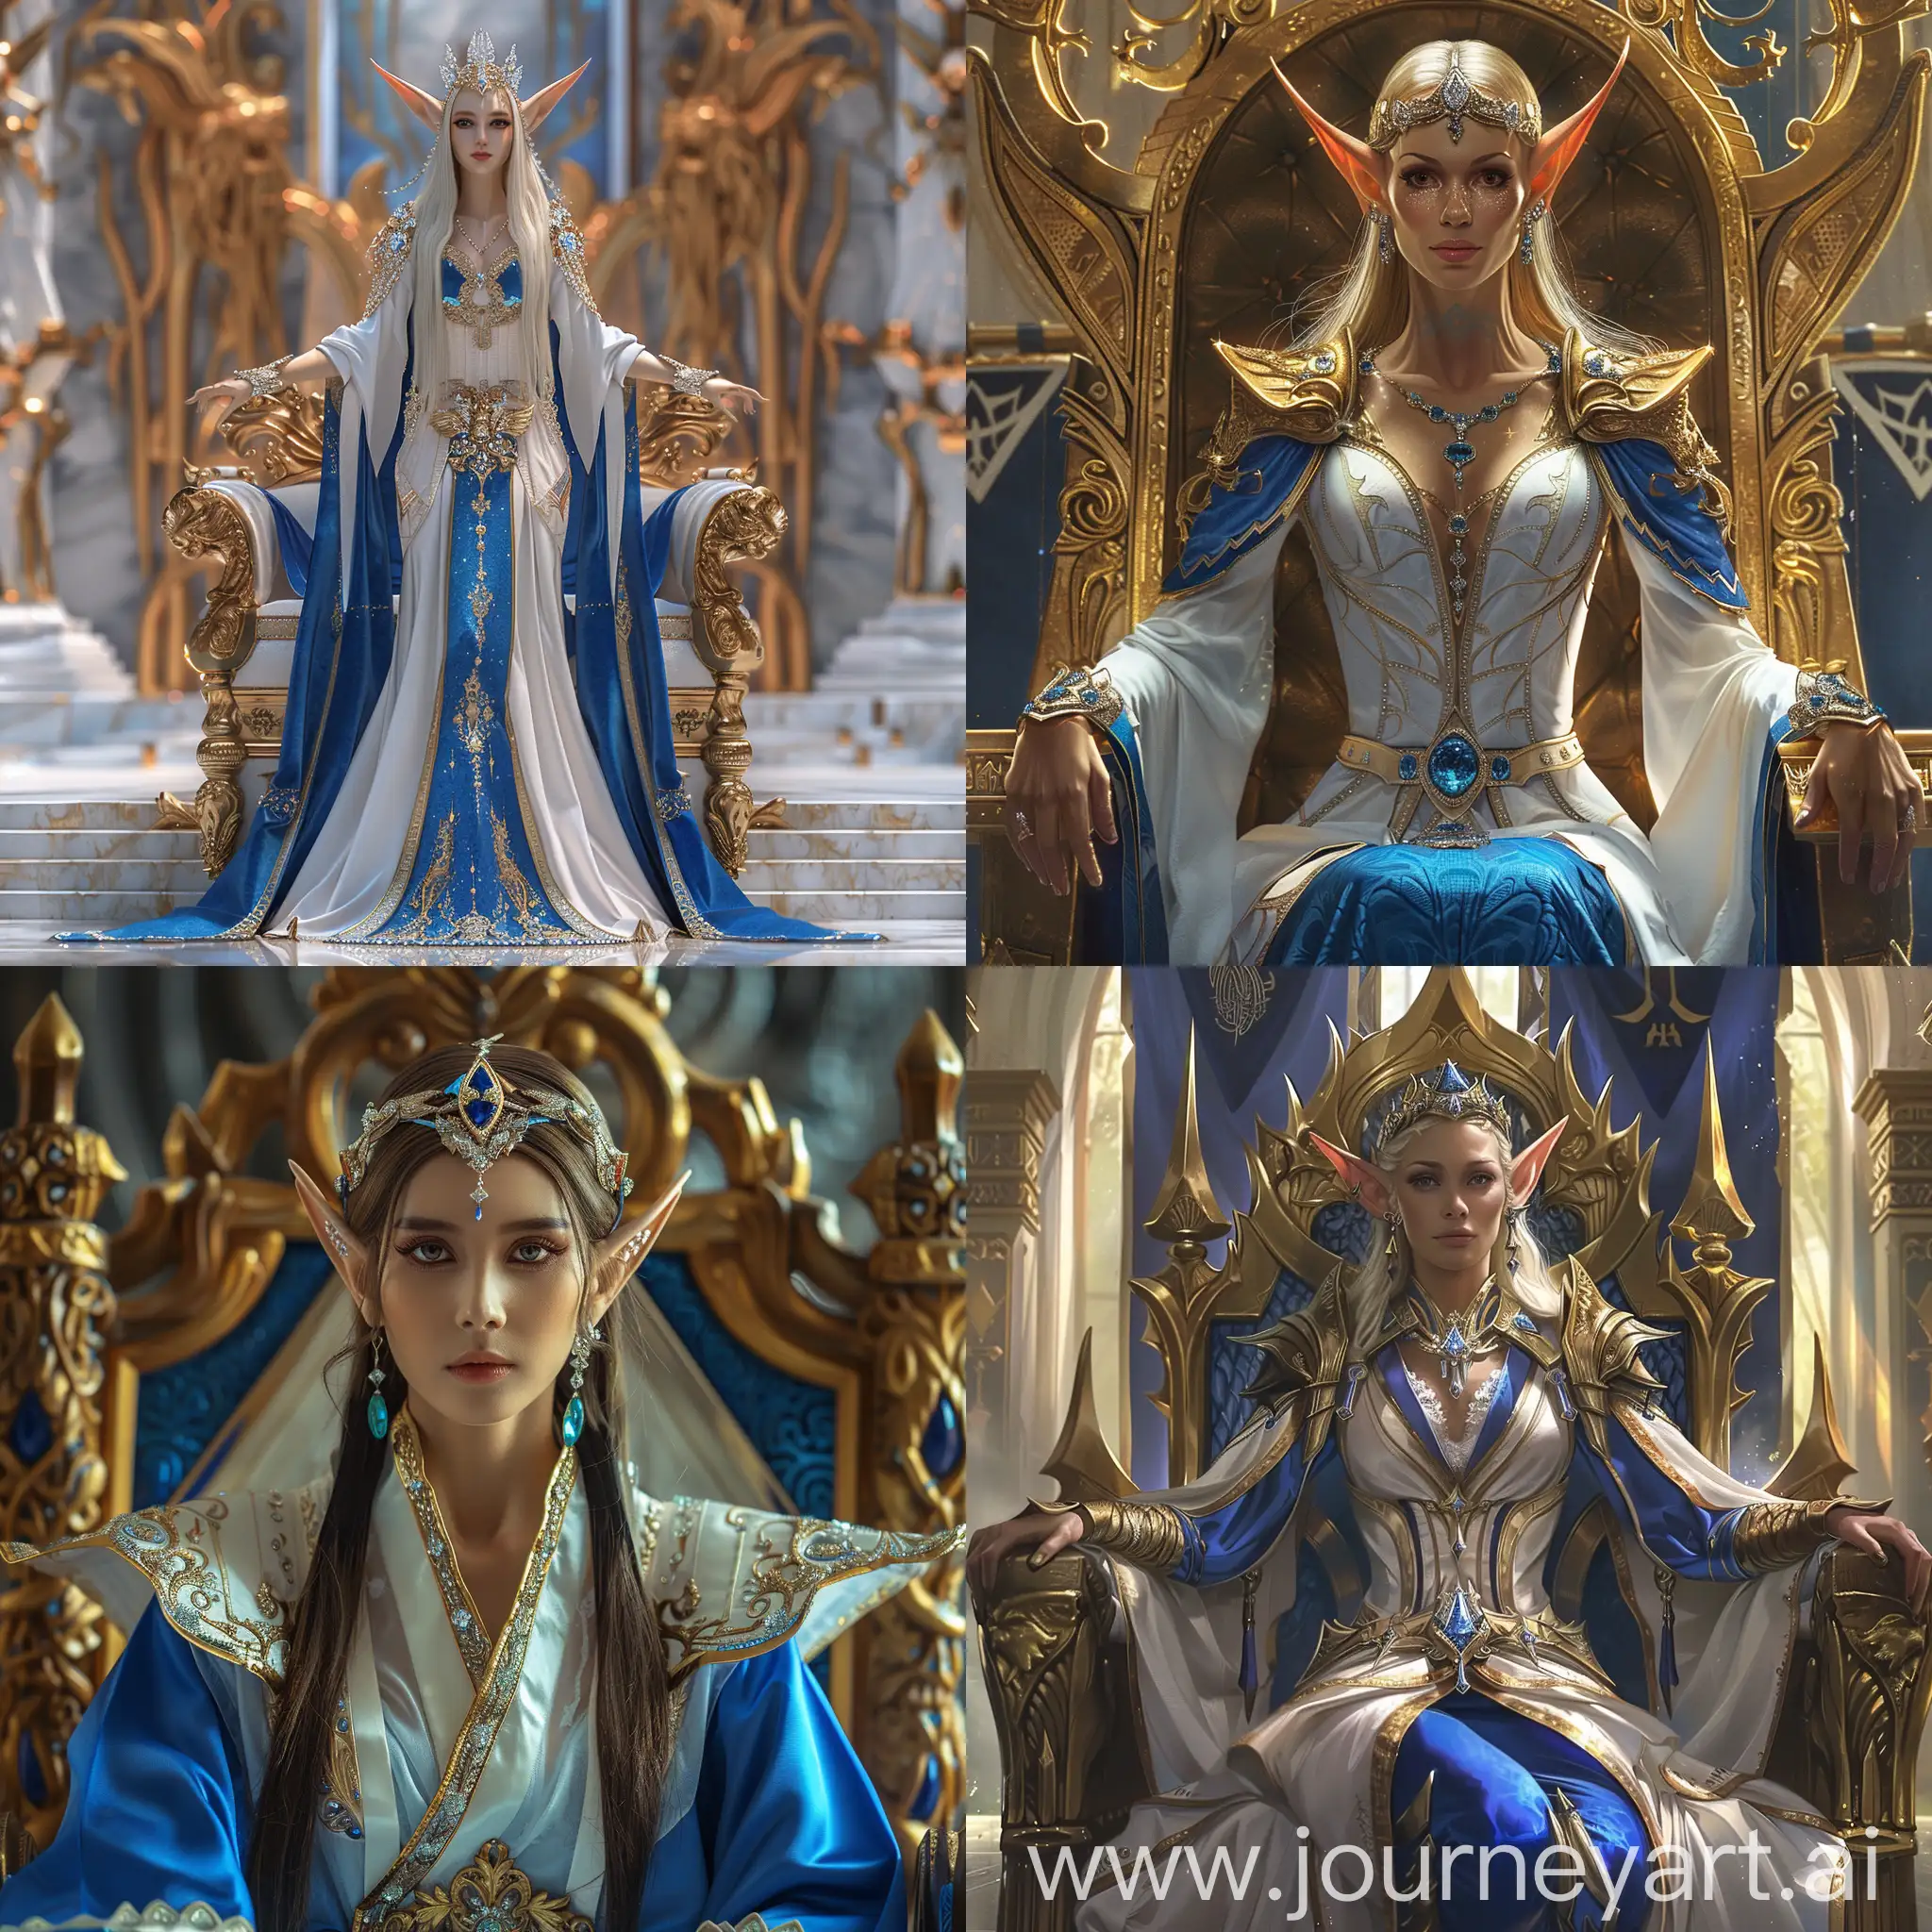 empress of mankind, elven, point ears, astral, epic, with diamonds and blue and white robes, evealing outfit, golden epic throne